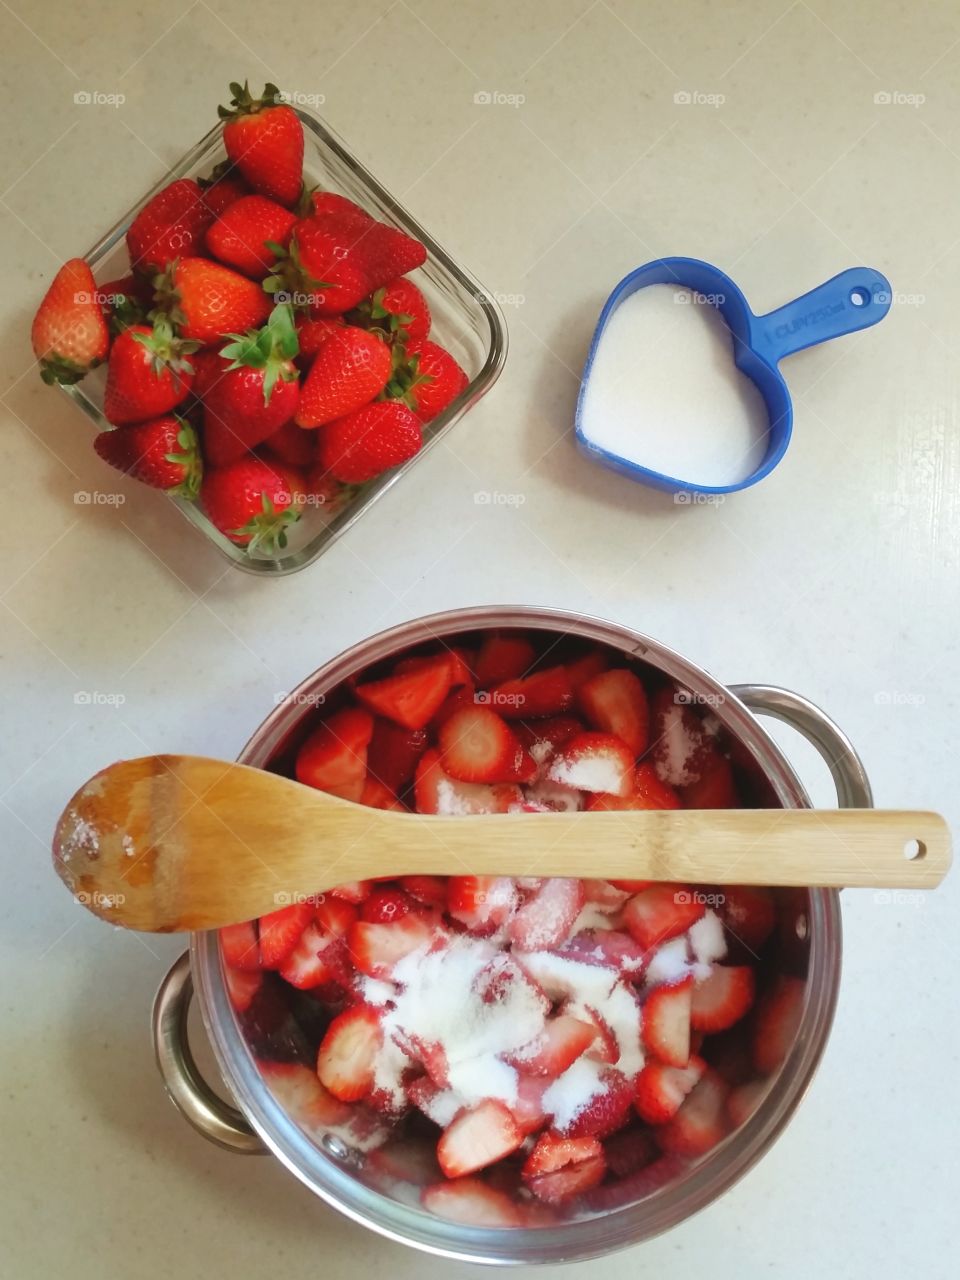 Preparations for making strawberry jam